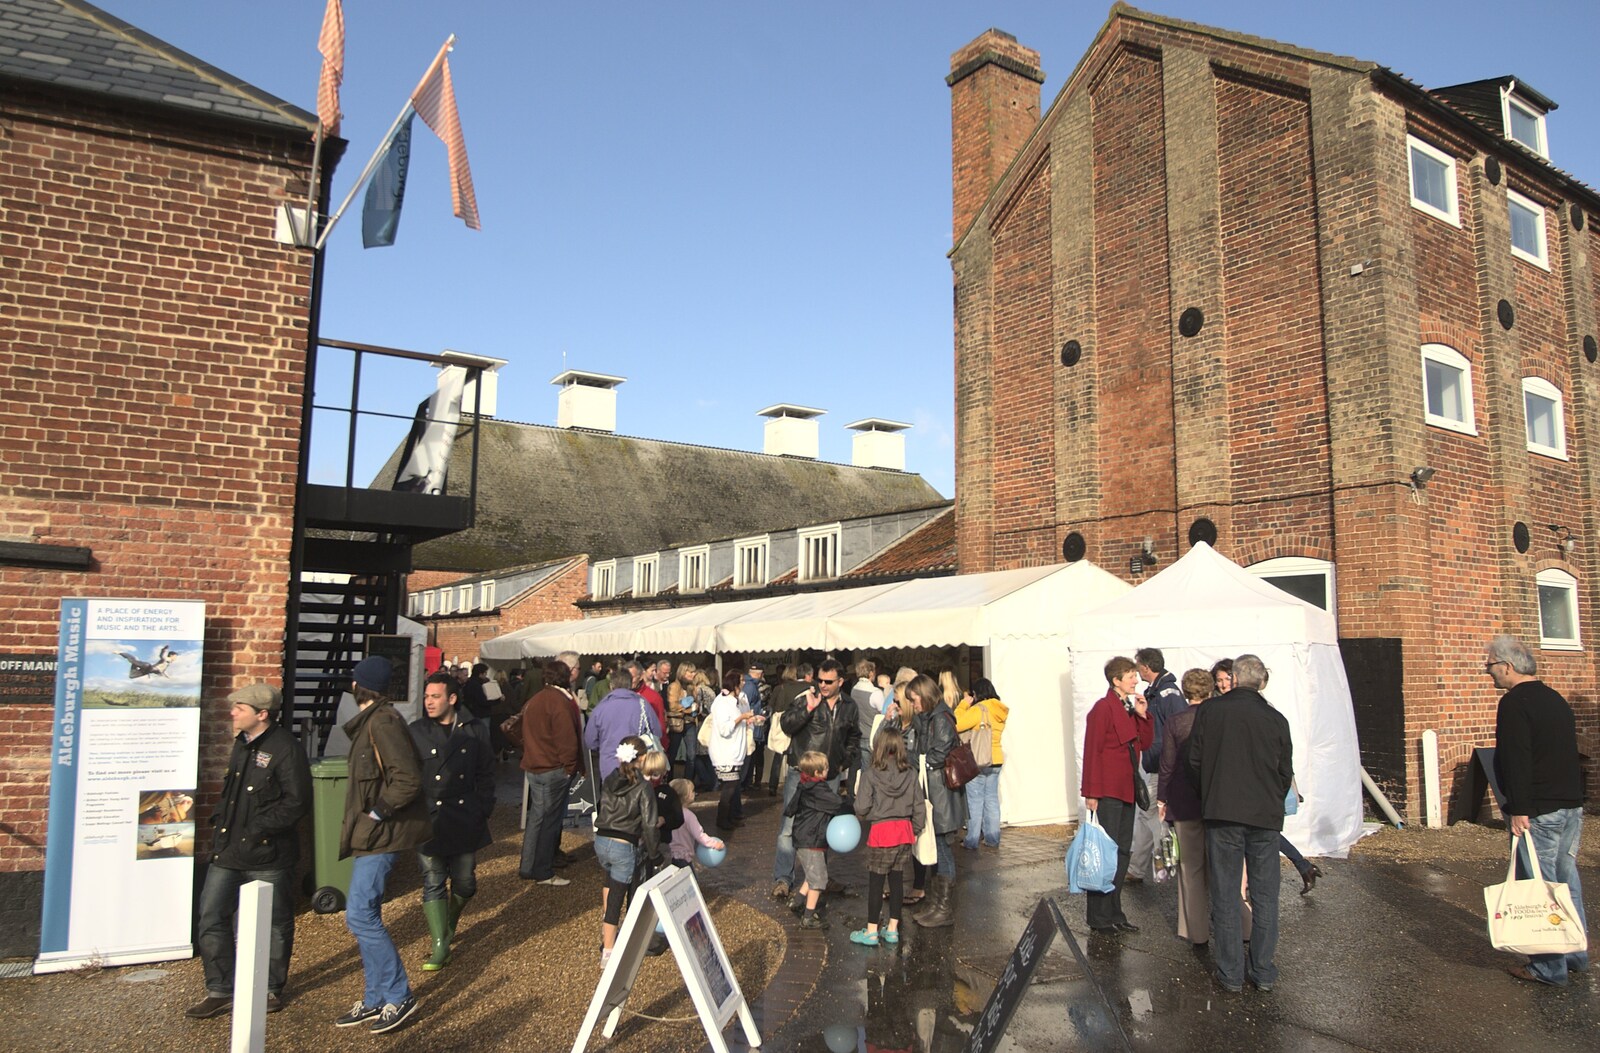 The Aldeburgh Food Festival, Snape Maltings, Suffolk - 25th September 2010: It's bright and clear after a downpour